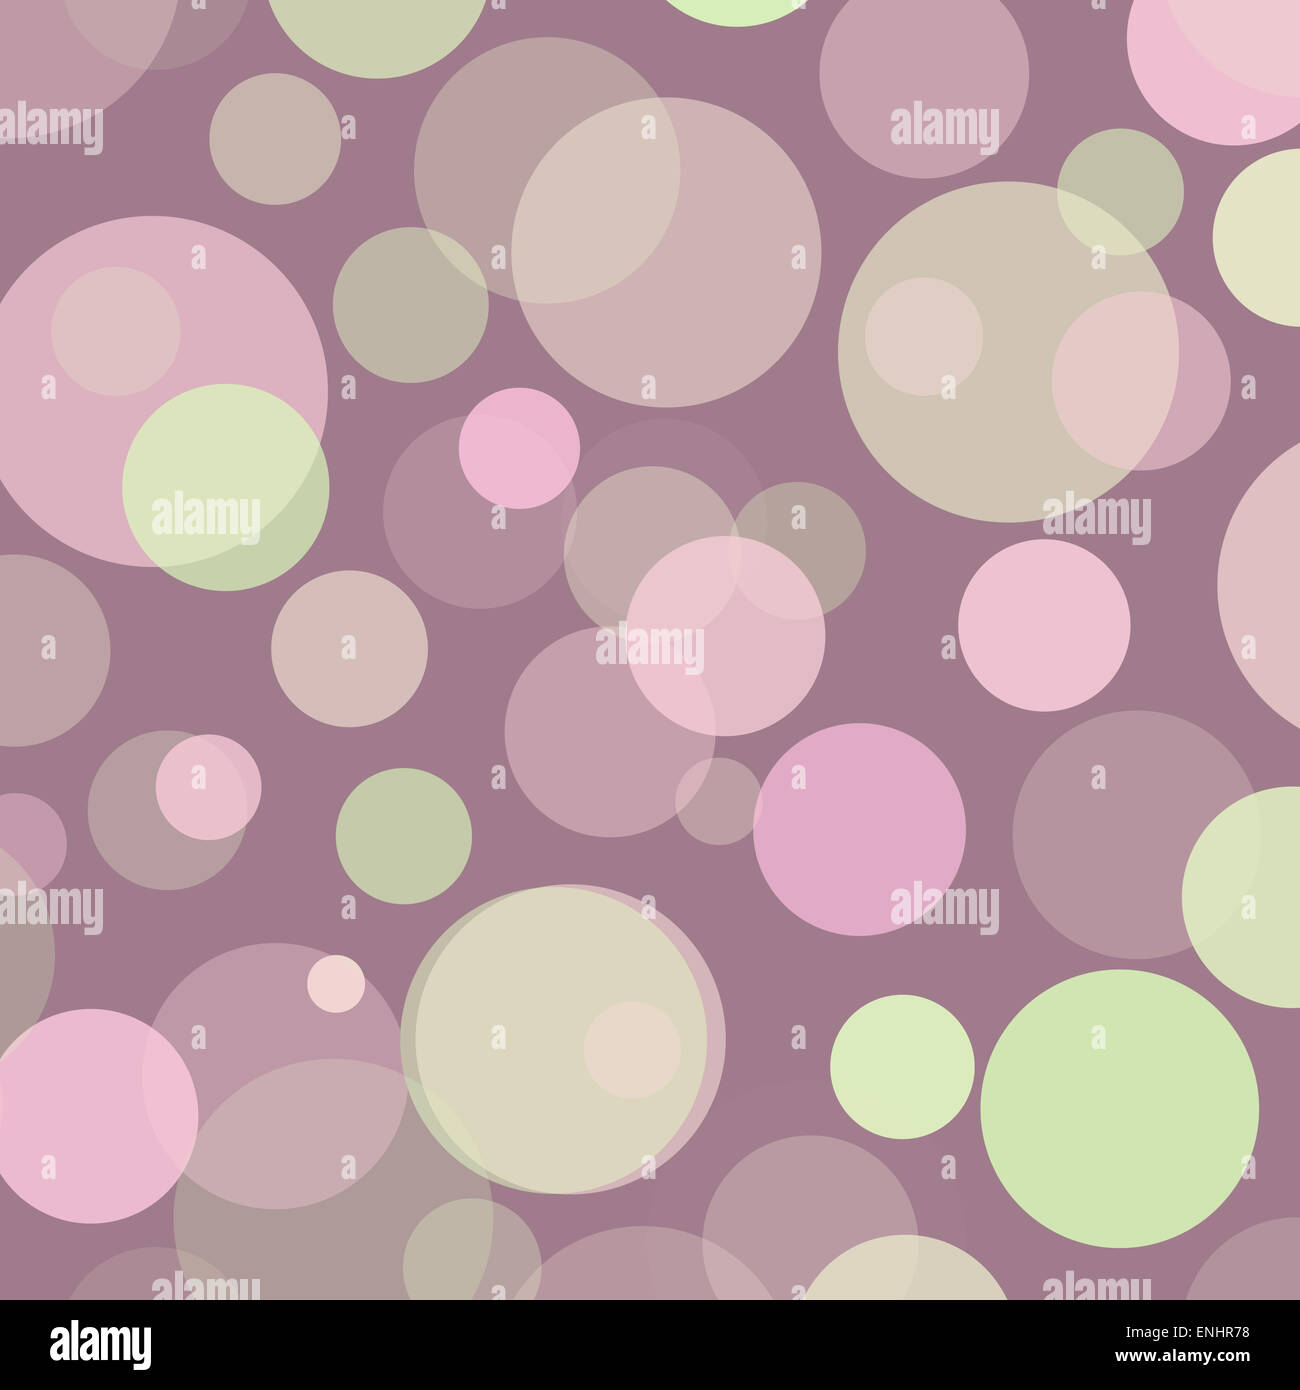 Pink Green Brown Mauve Polka Dots Background Texture Stock Photo